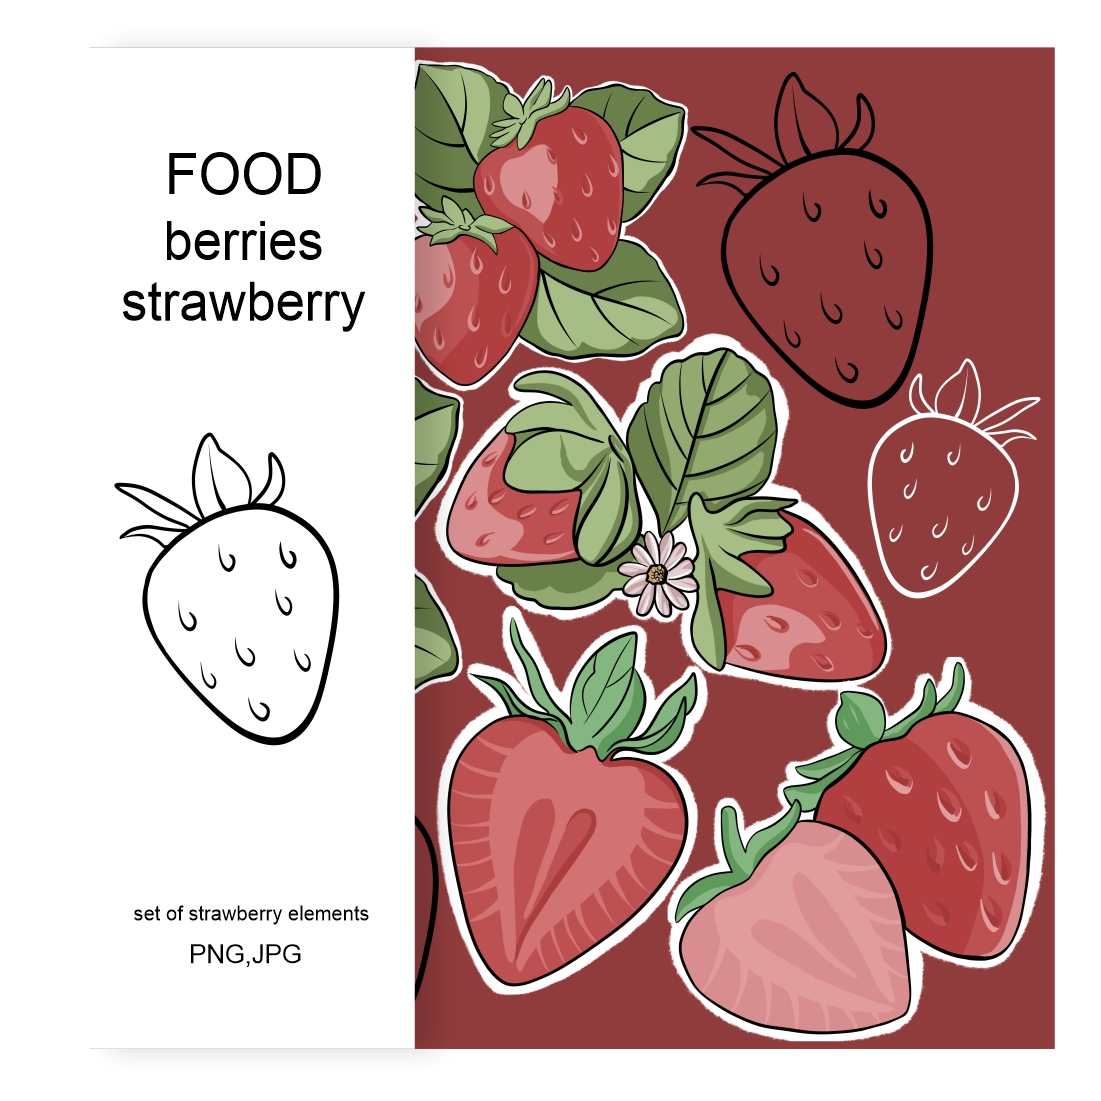 Strawberry Illustrations main cover.